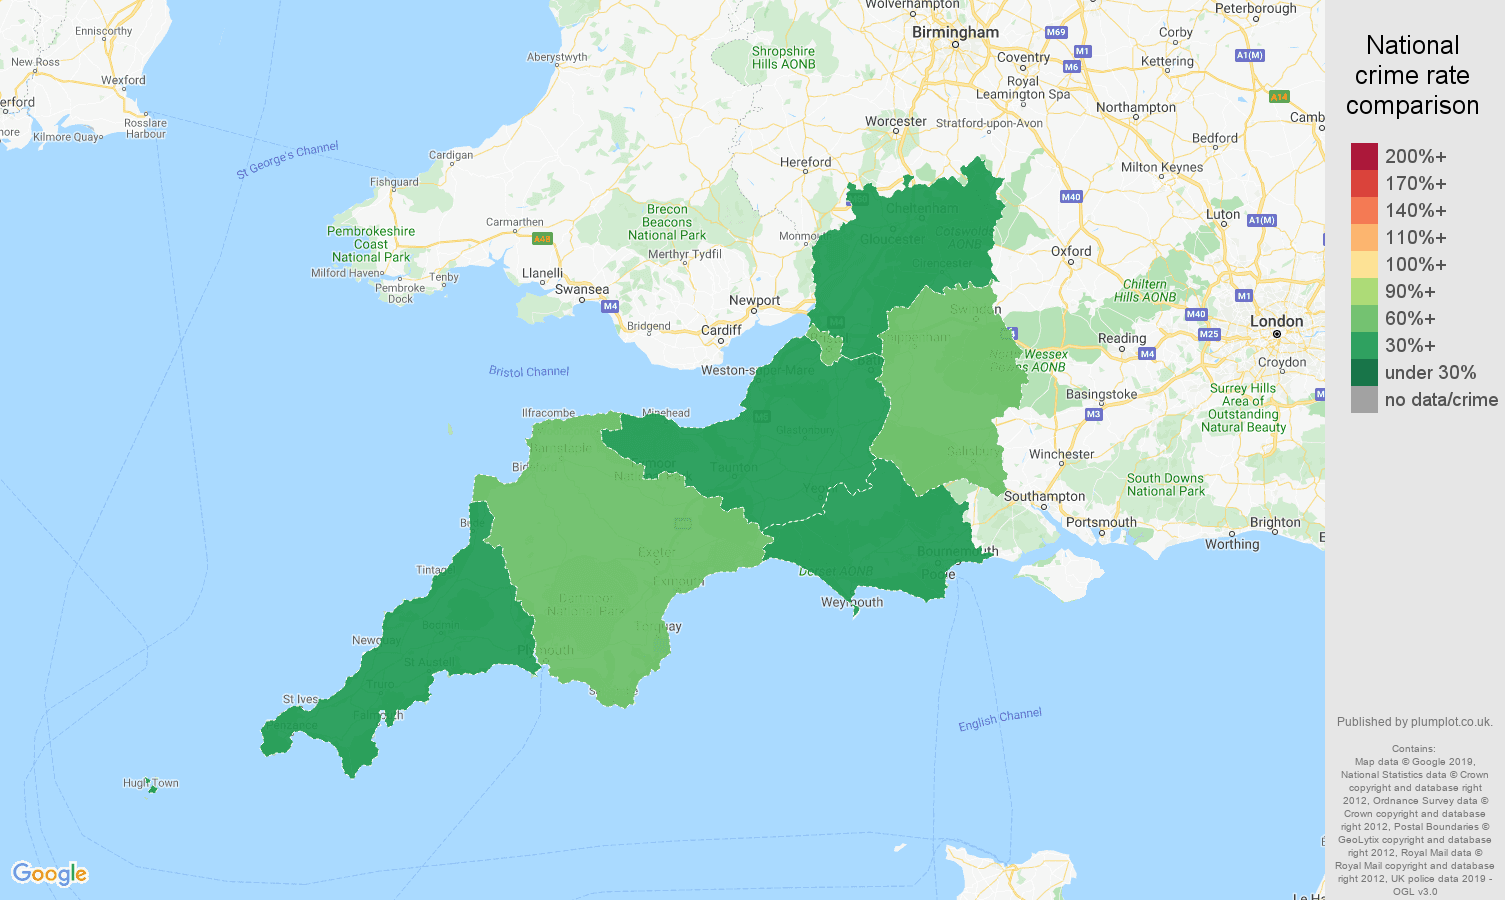 South West other crime rate comparison map